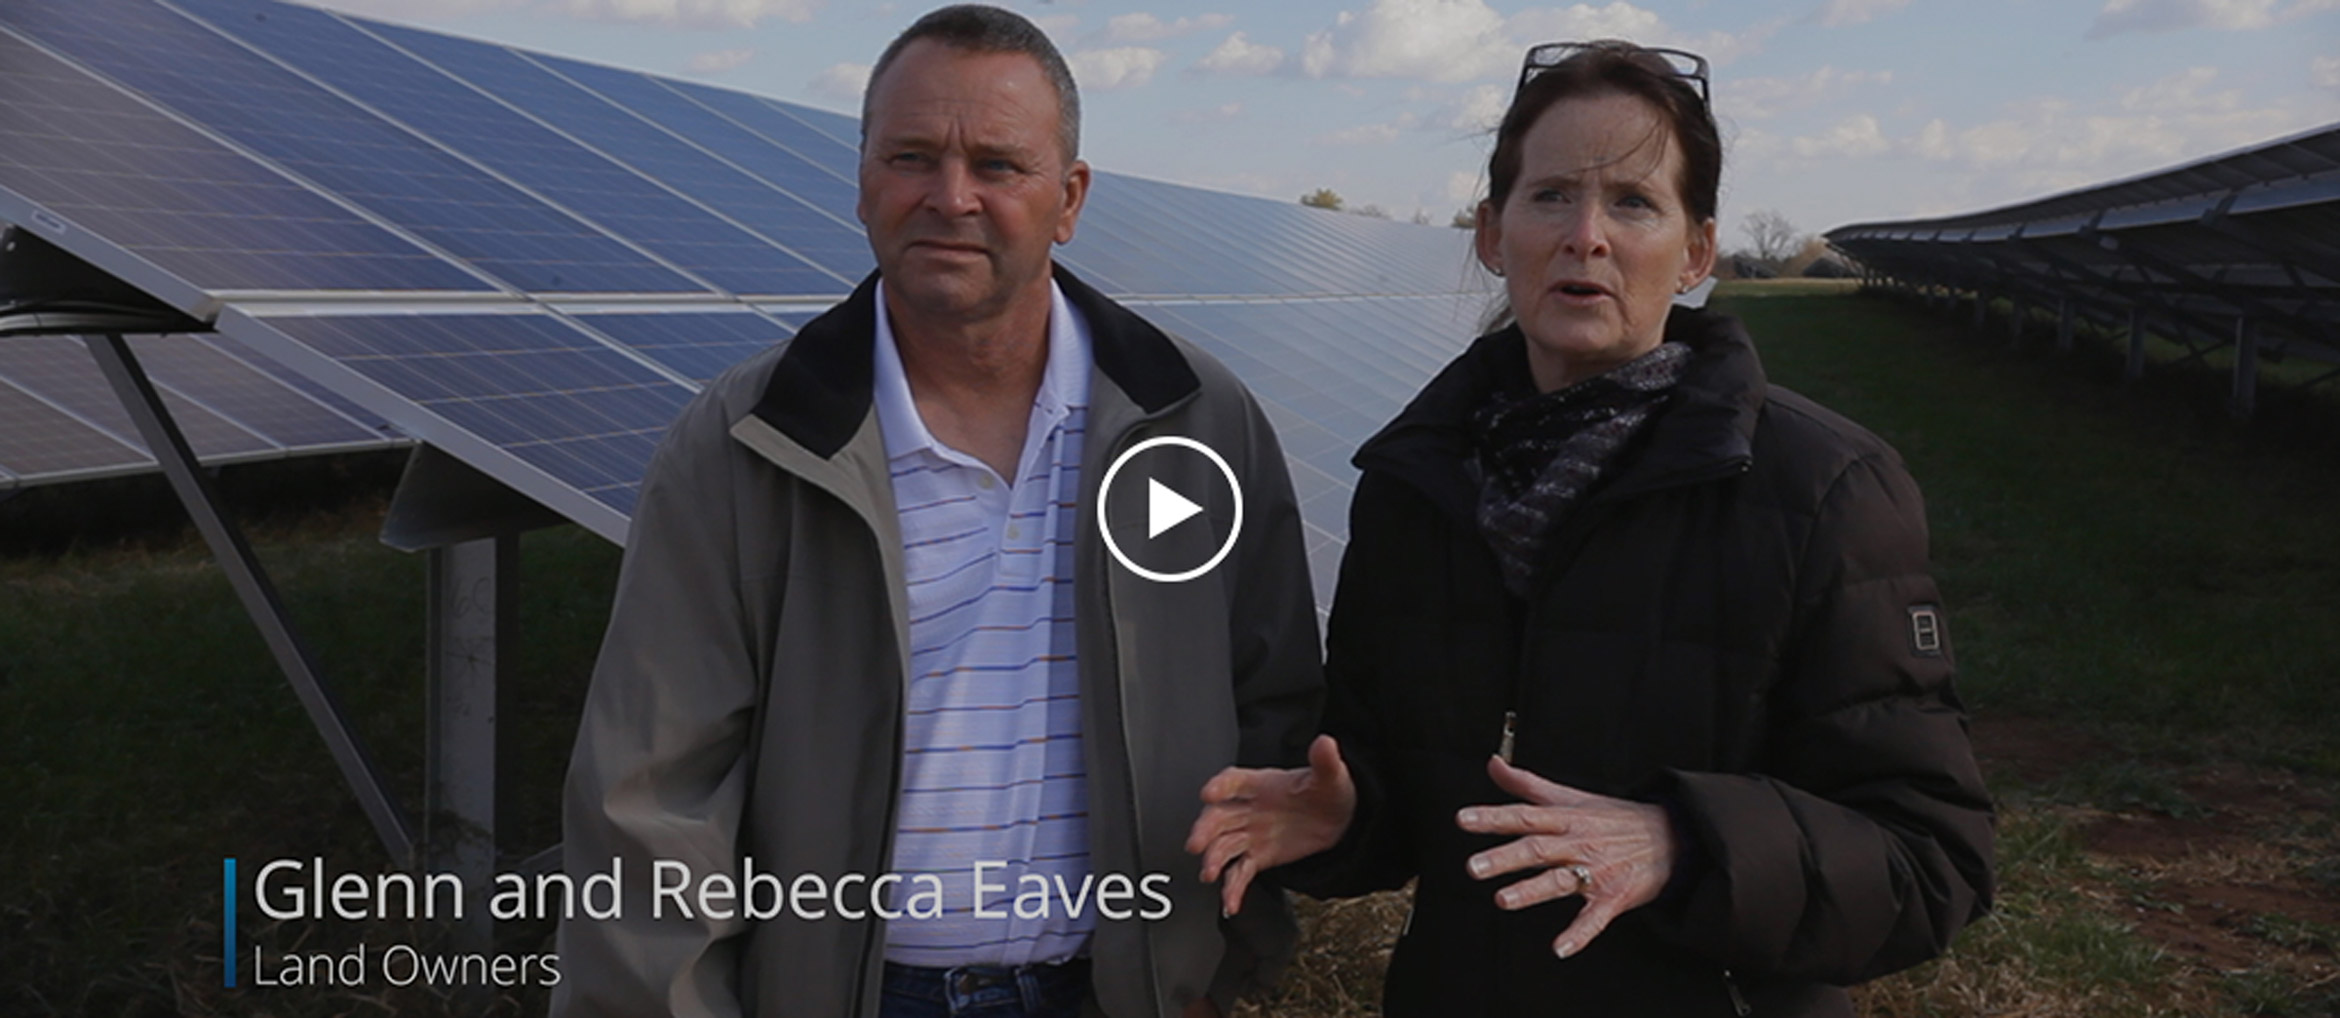 Overview video about solar company Cypress Creek Renewables